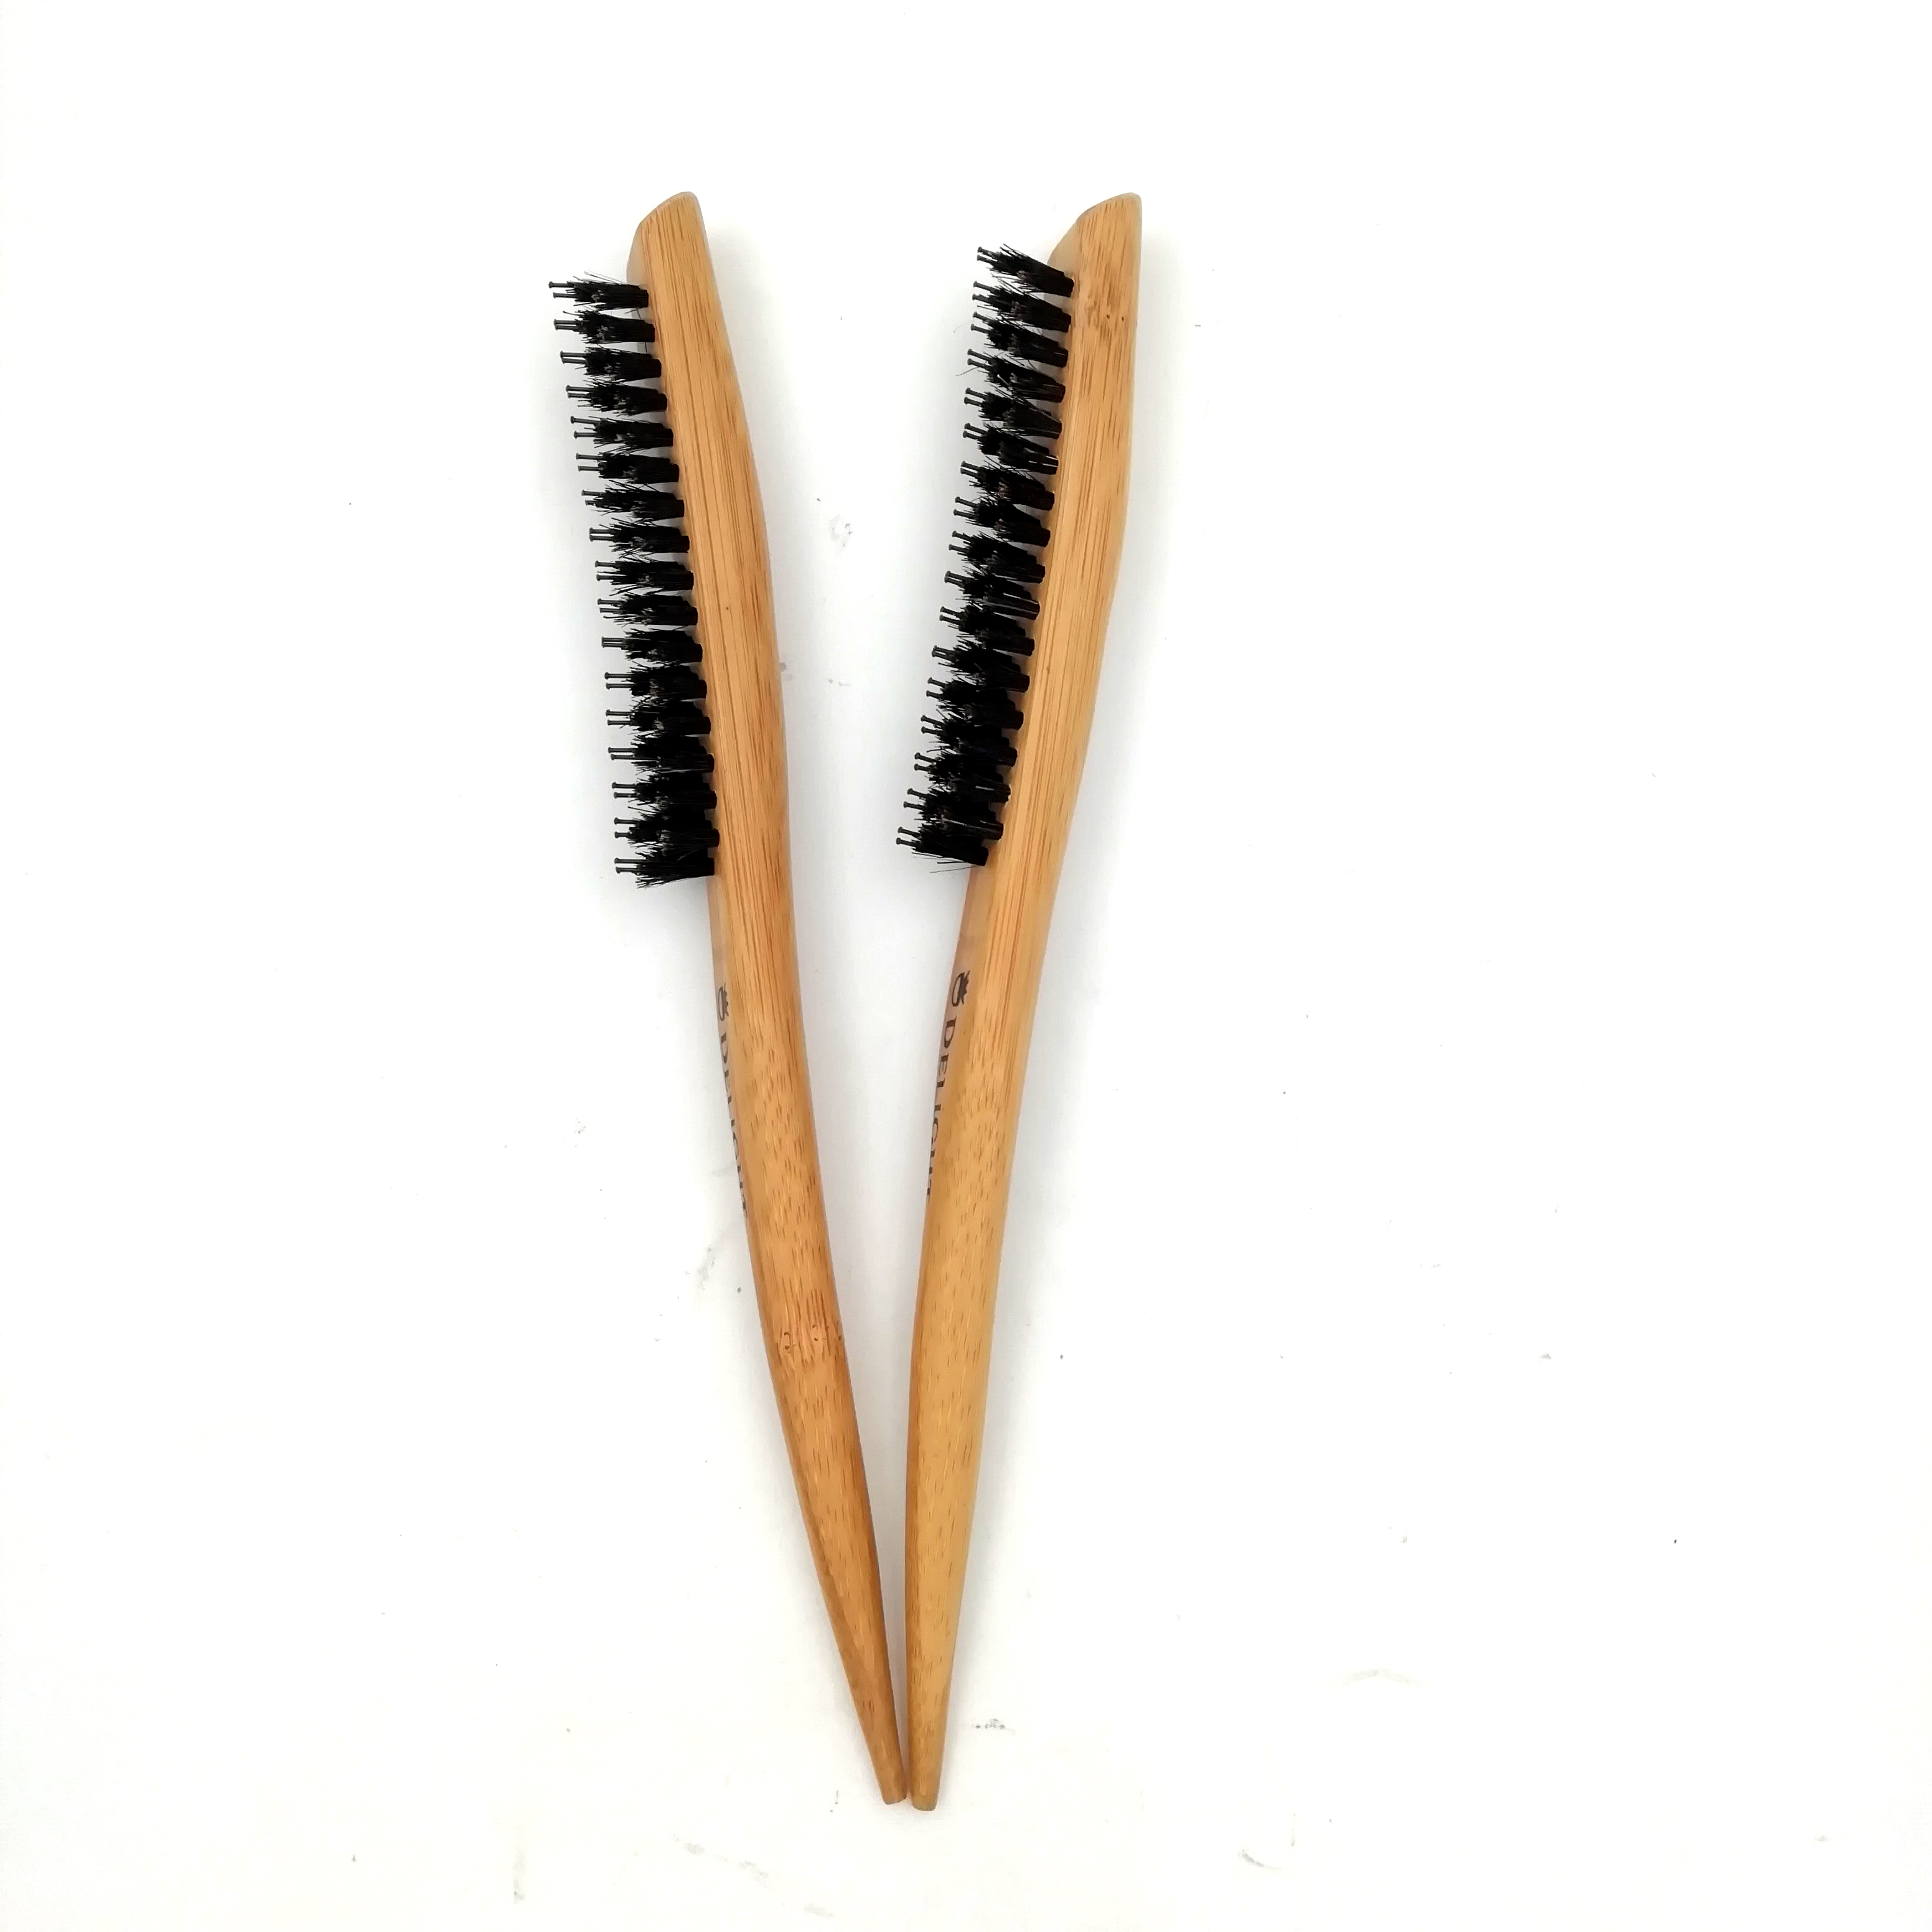 Hot sale Teasing Back Hair Brushes Wooden Slim Line Comb Hairbrush Extension Hairdressing Teasing Styling Tools Featured Image